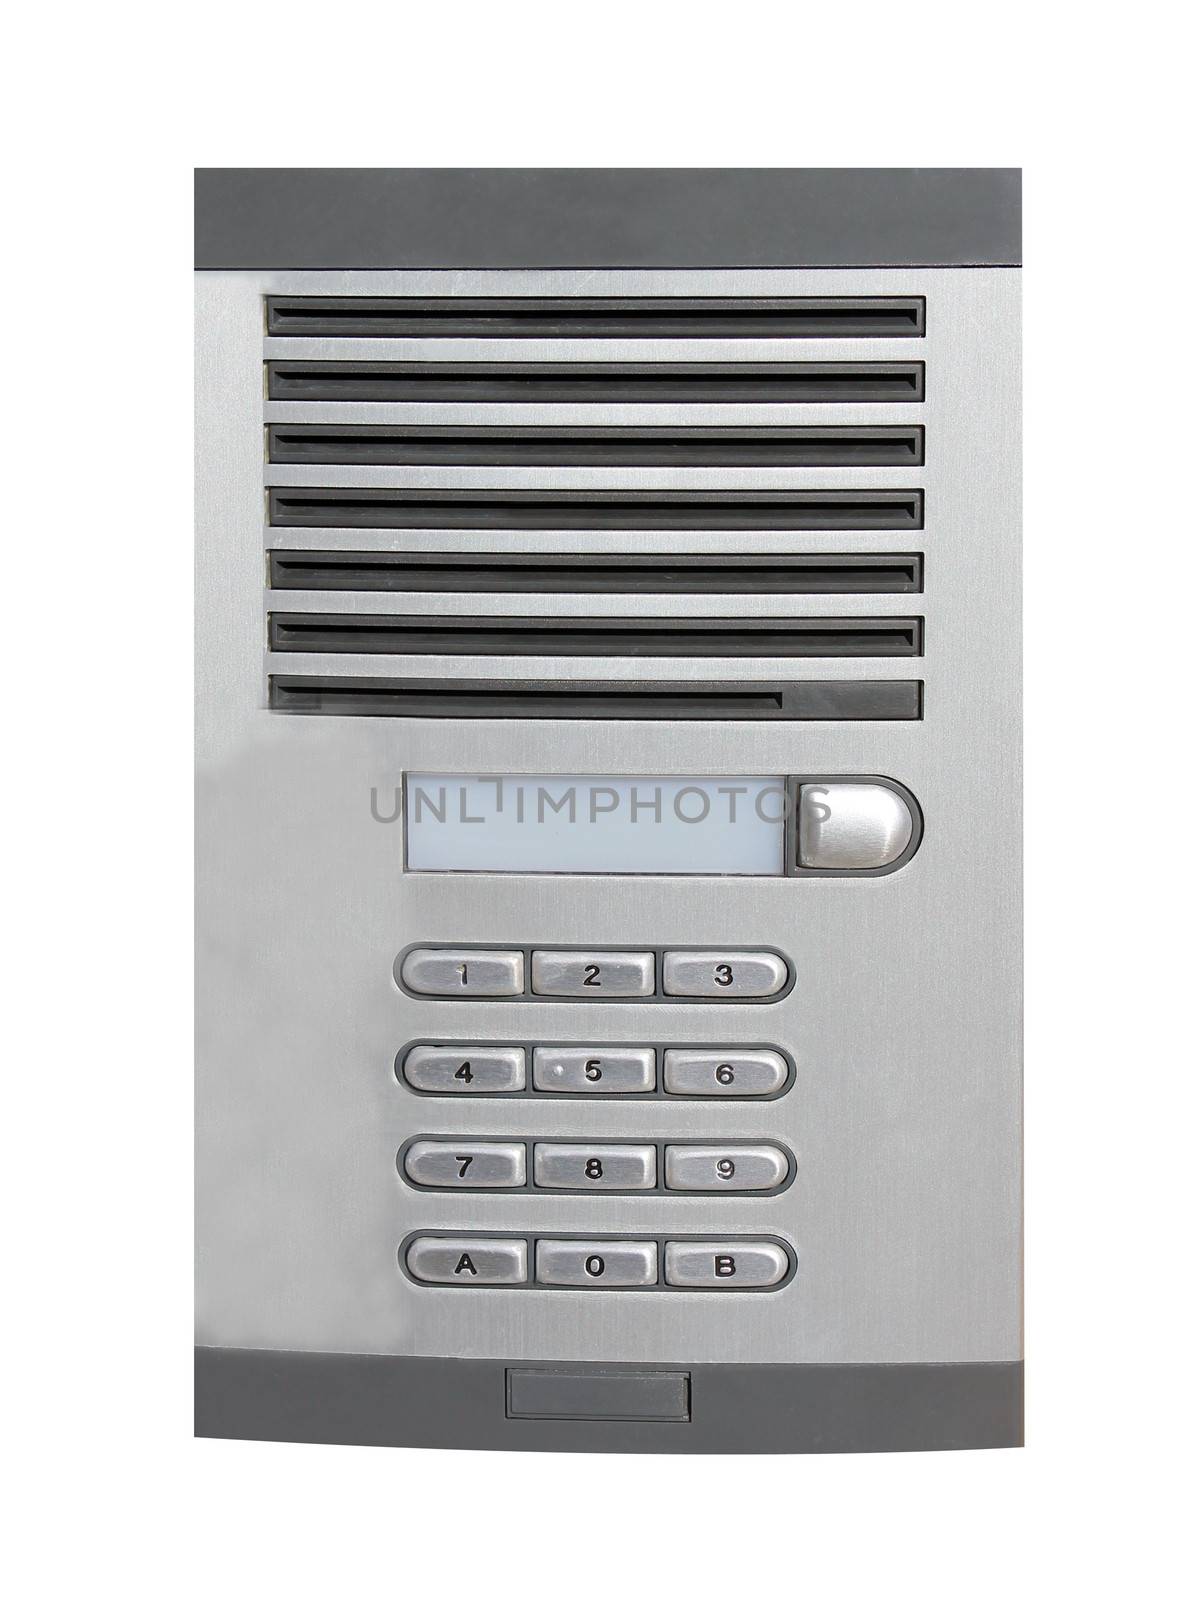 Office intercom isolated on a white background.